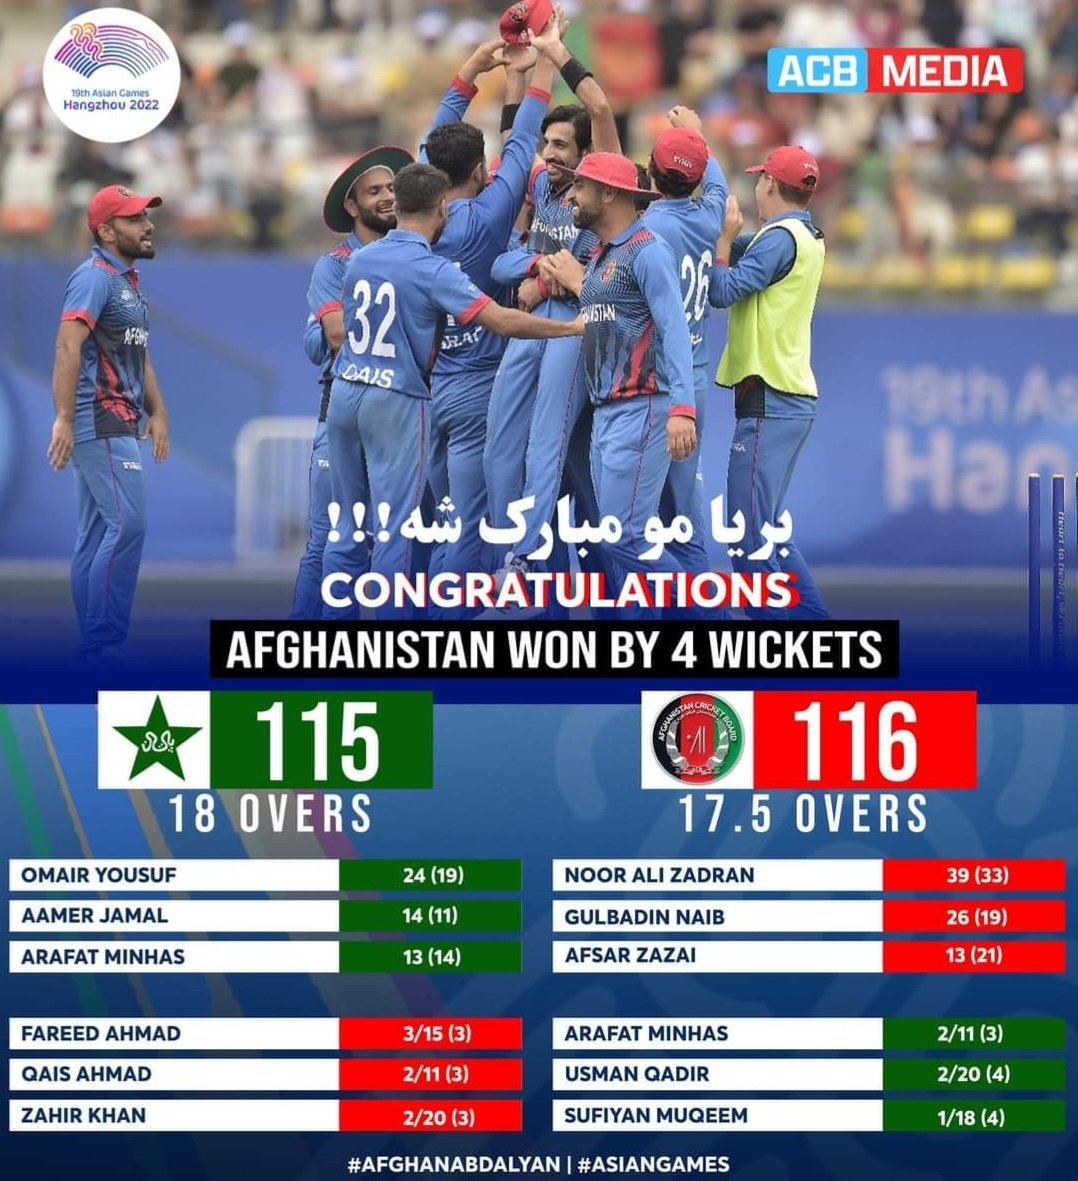 Salute 🫡 for outstanding team effort boys well done and Congratulations ❤️🙌🎊 to entire nation for a wonderful win against Pakistan in #AsianGames2023 #Afghanistan beat #Pakistan @GbNaib